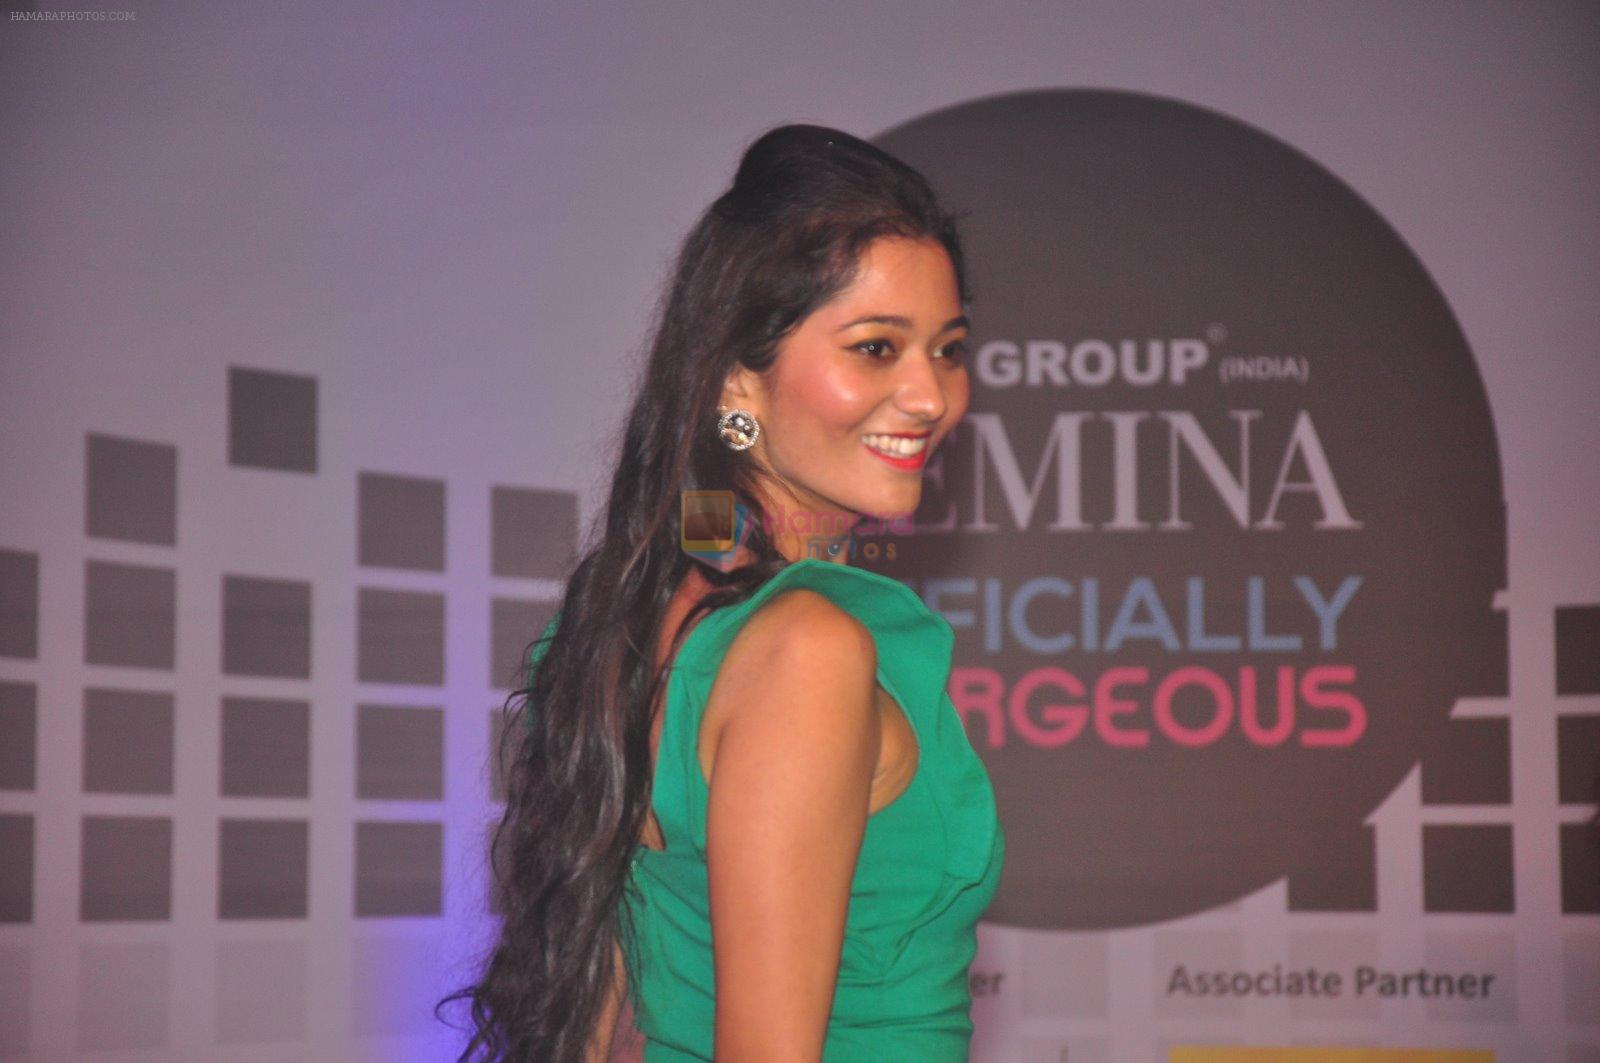 at Femina Officially Gorgeous in Pune on 9th Dec 2014